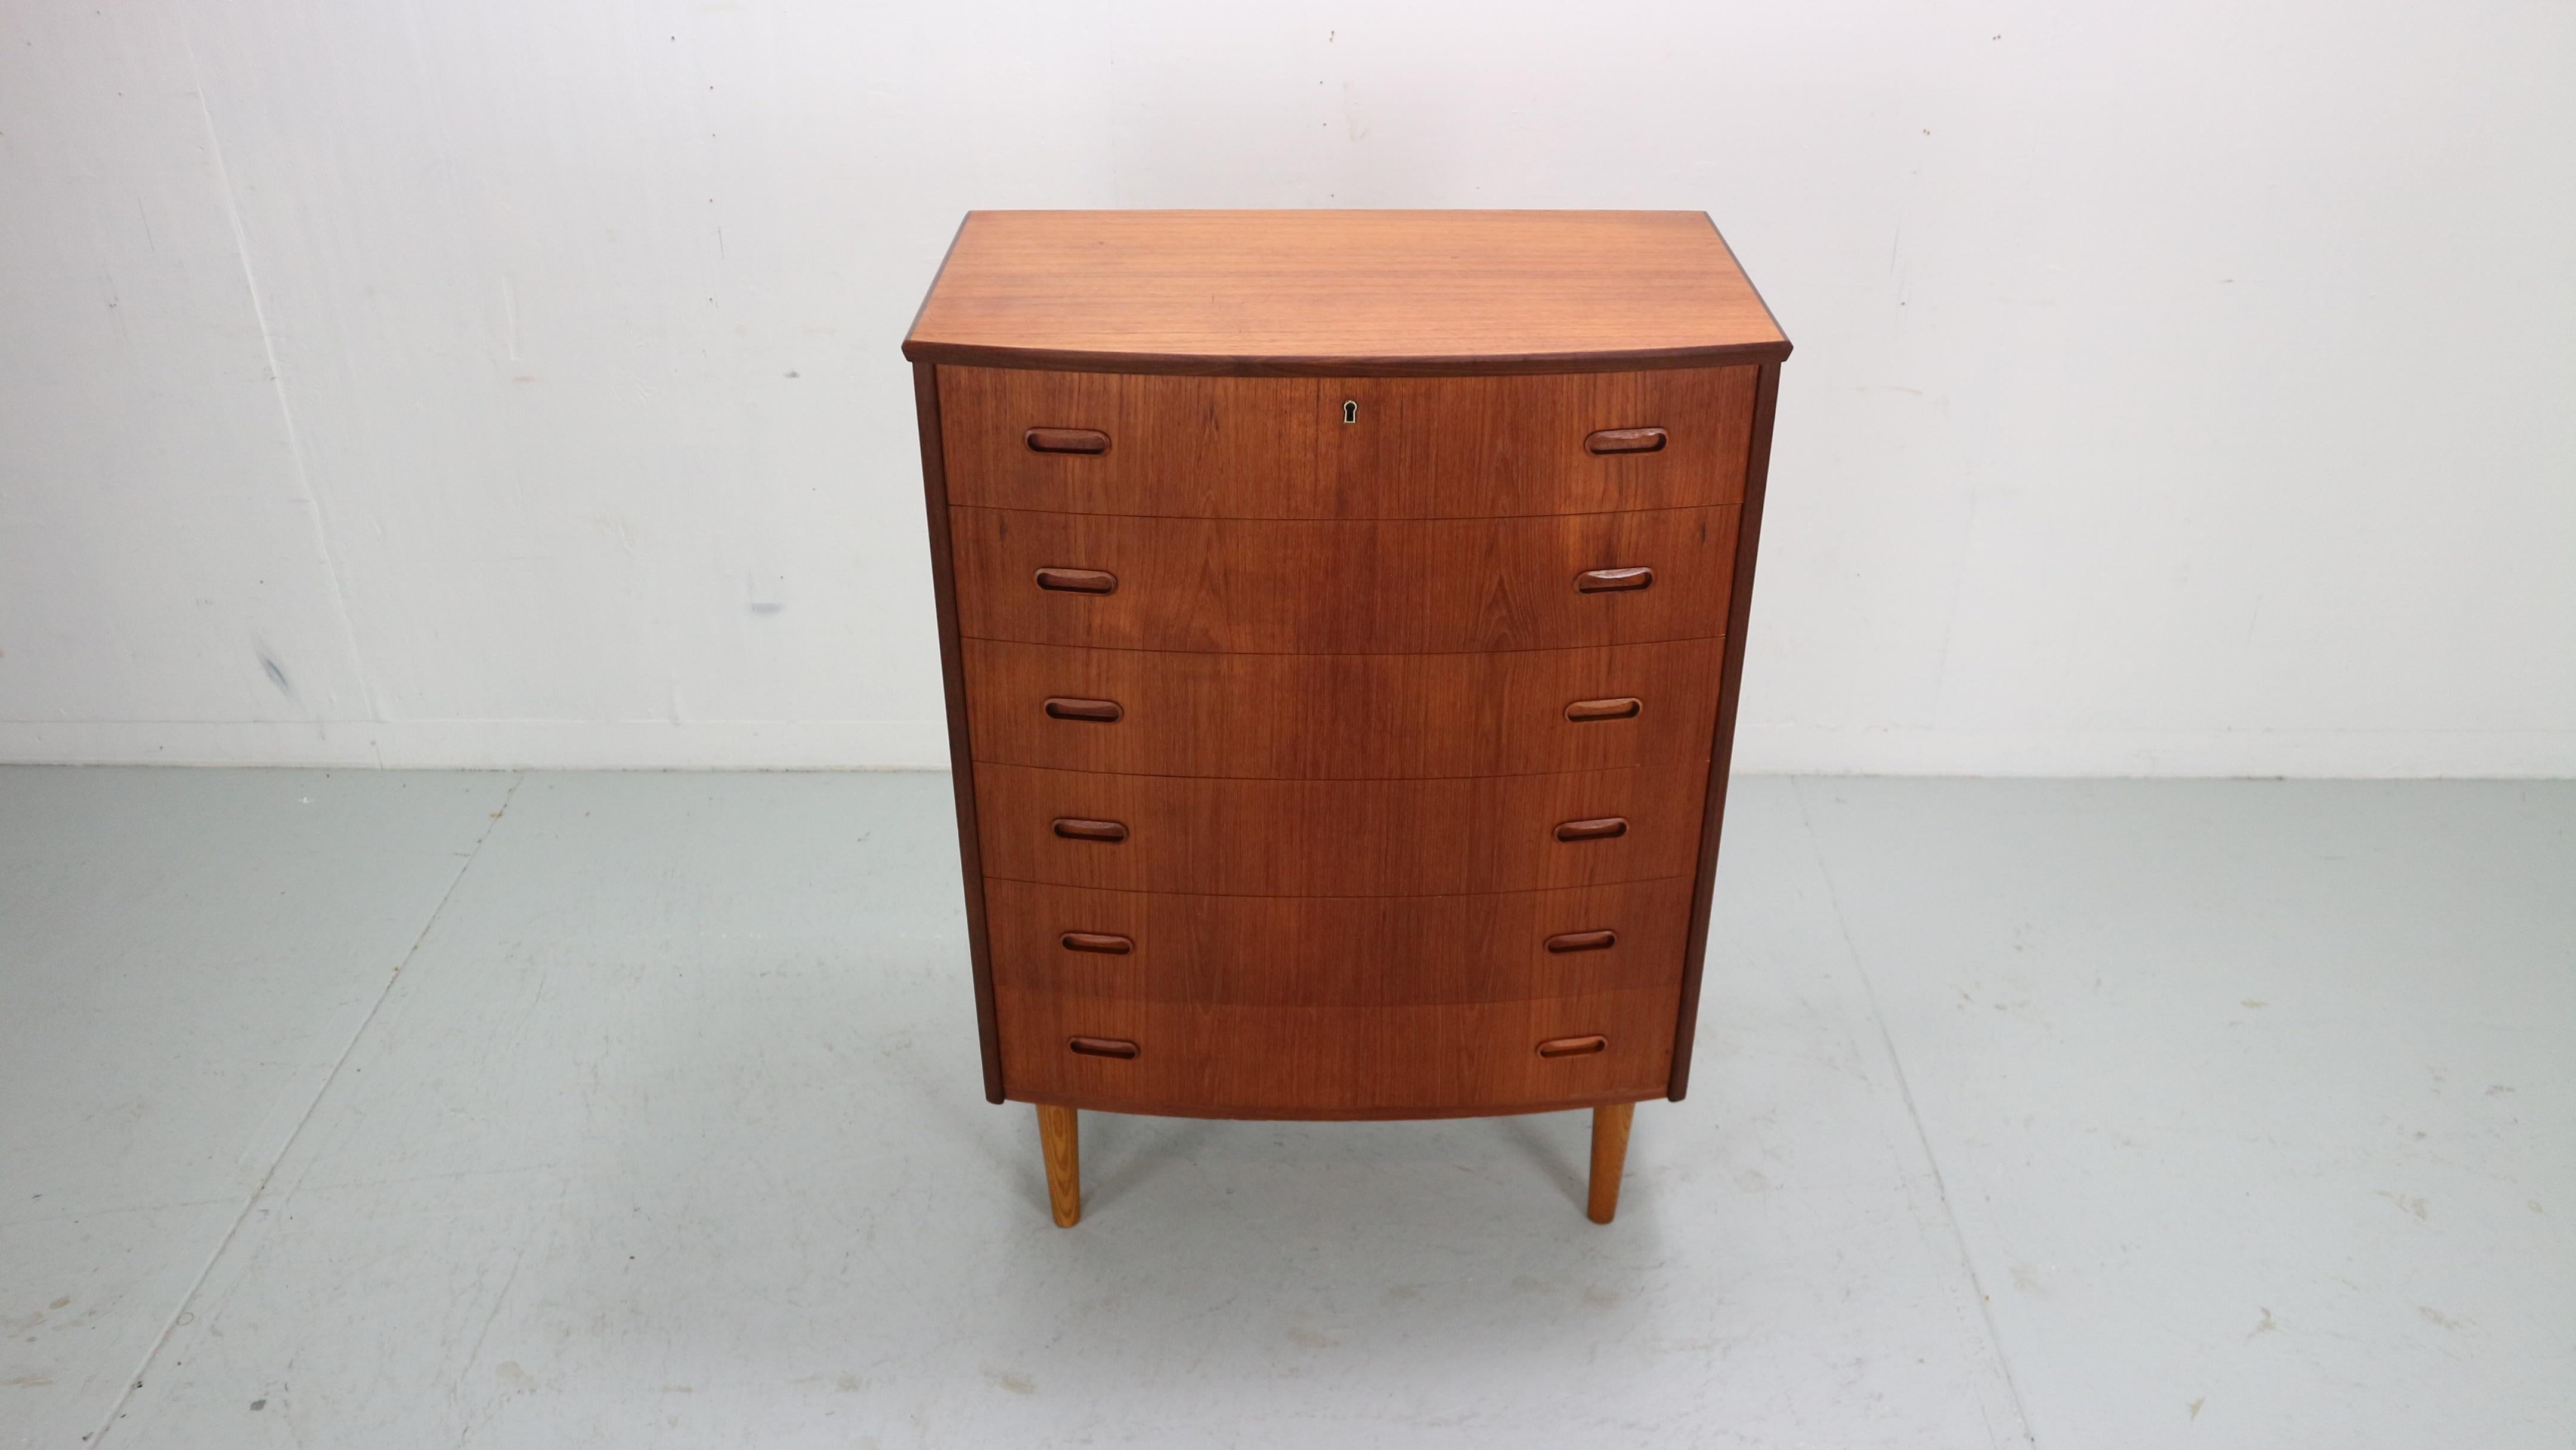 Mid- Century modern period chest of 6 drawers or tallboy cabinet made in 1960's Denmark.

Made of teak wood veneer. Elegant handles from both sides.
Original key with the working lock on the upper drawer.
Good working sliding drawers.
High quality